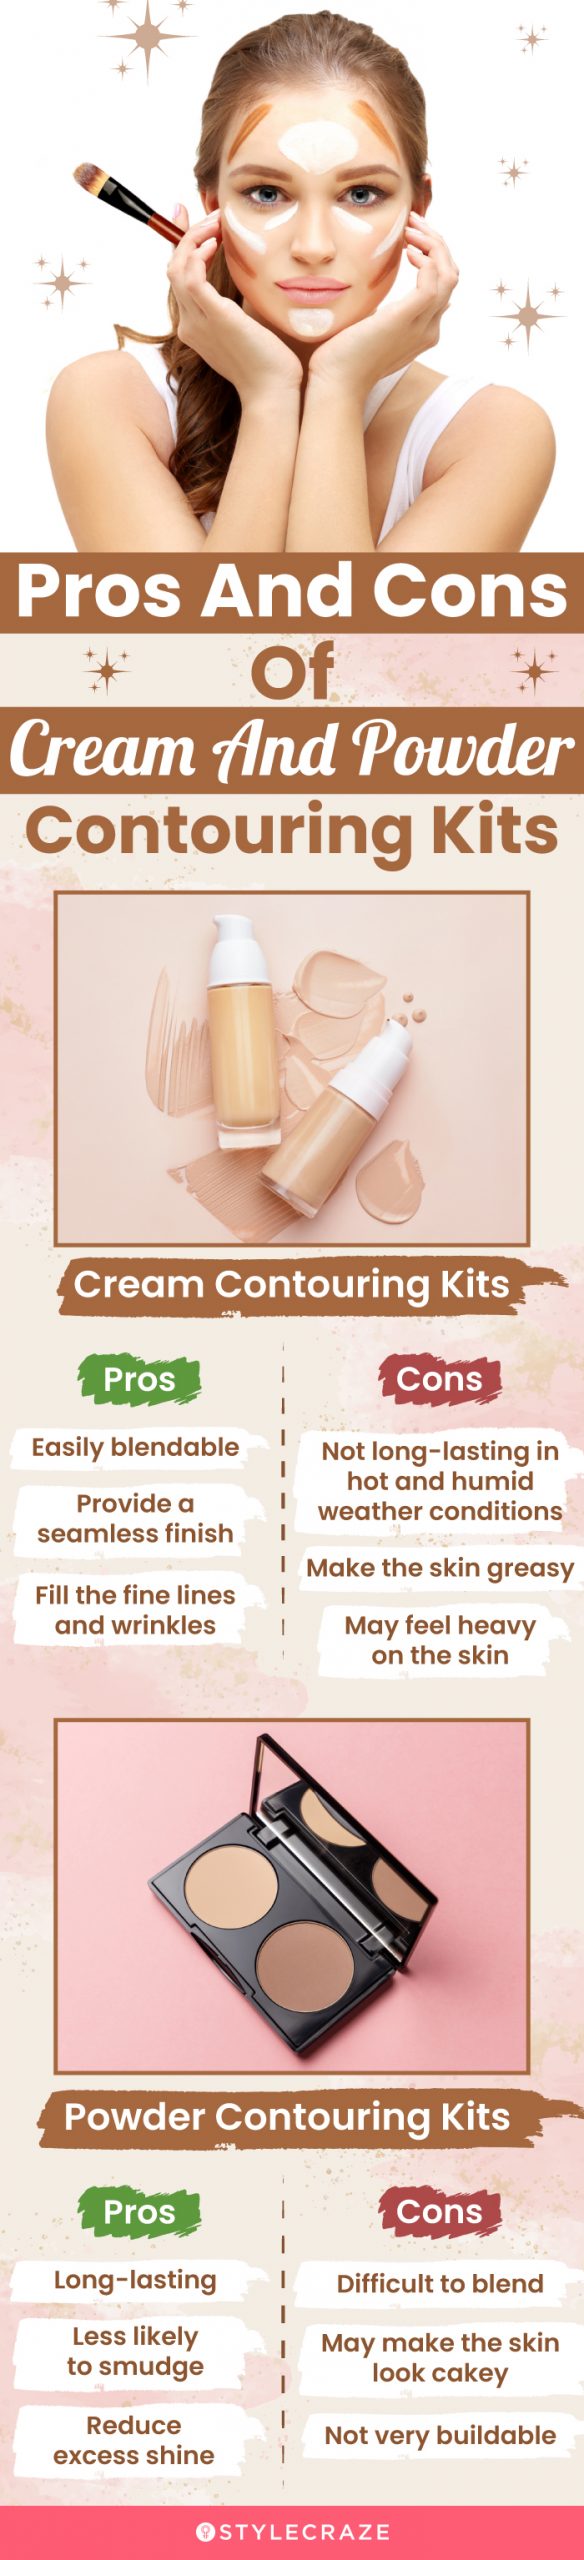 Pros And Cons Of Cream And Powder Contouring Kits (infographic)